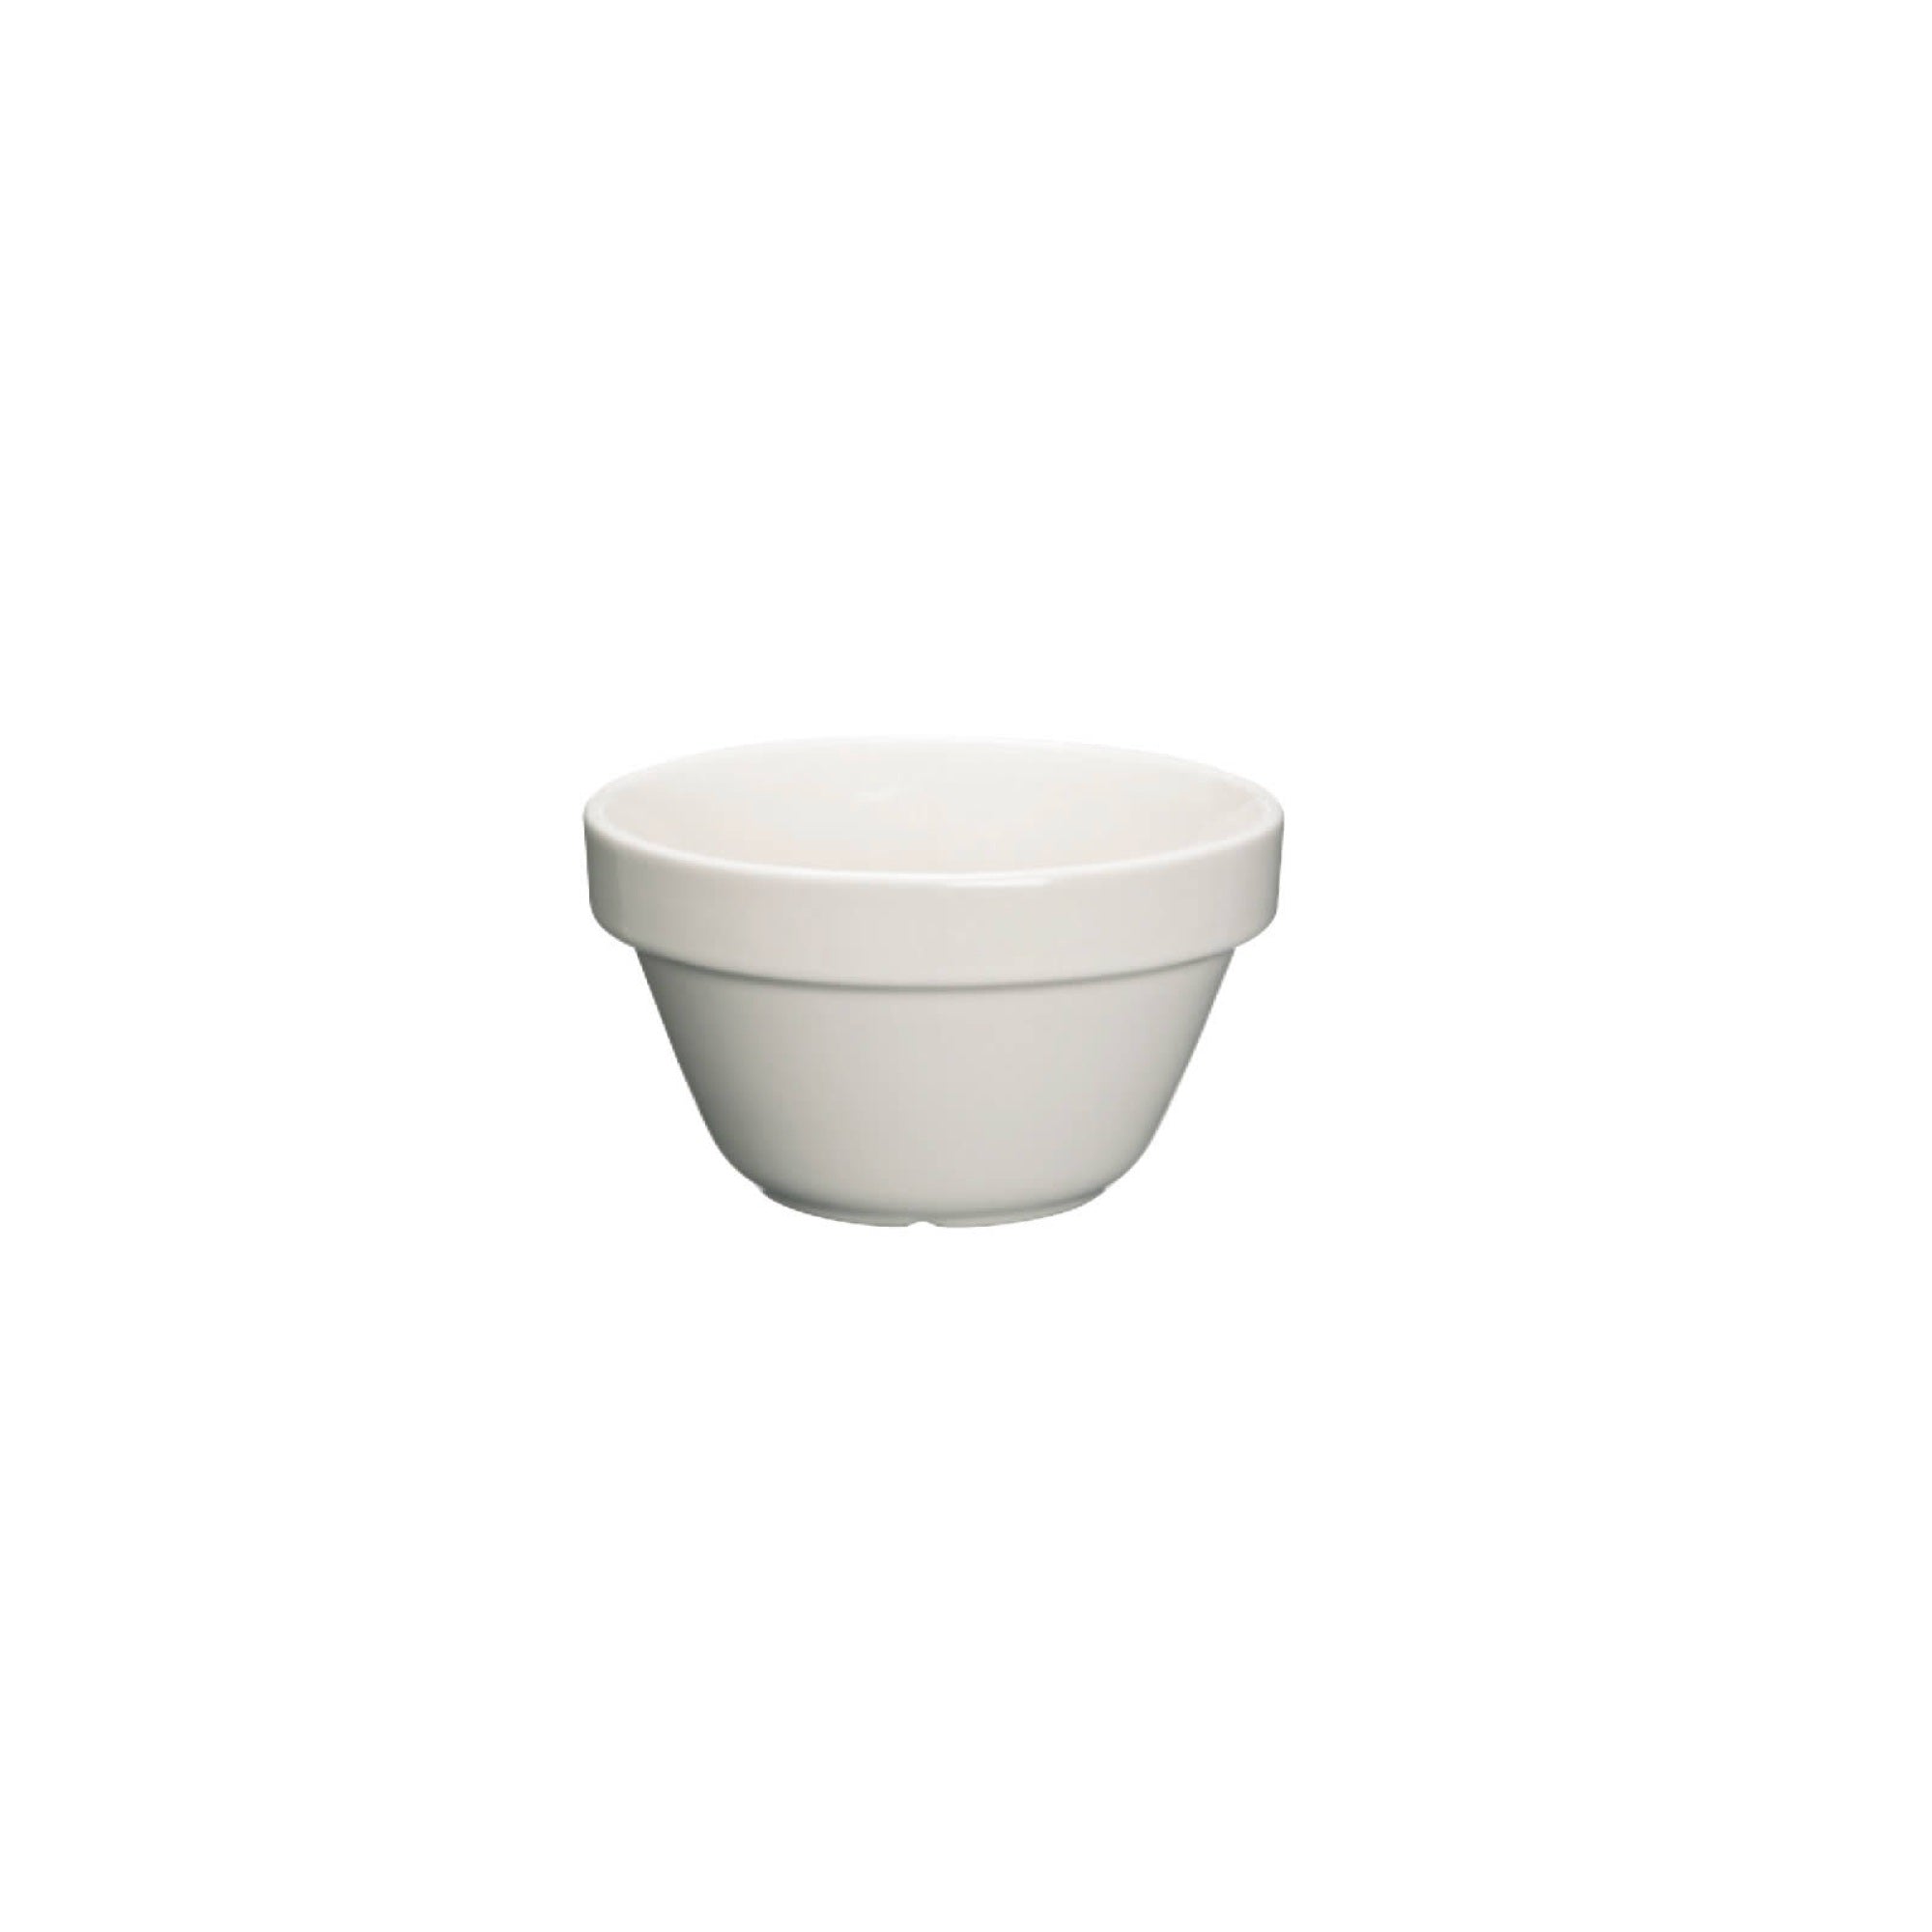 Home Made Traditional Stoneware 200ml Pudding Basin Bowl - The Cooks Cupboard Ltd